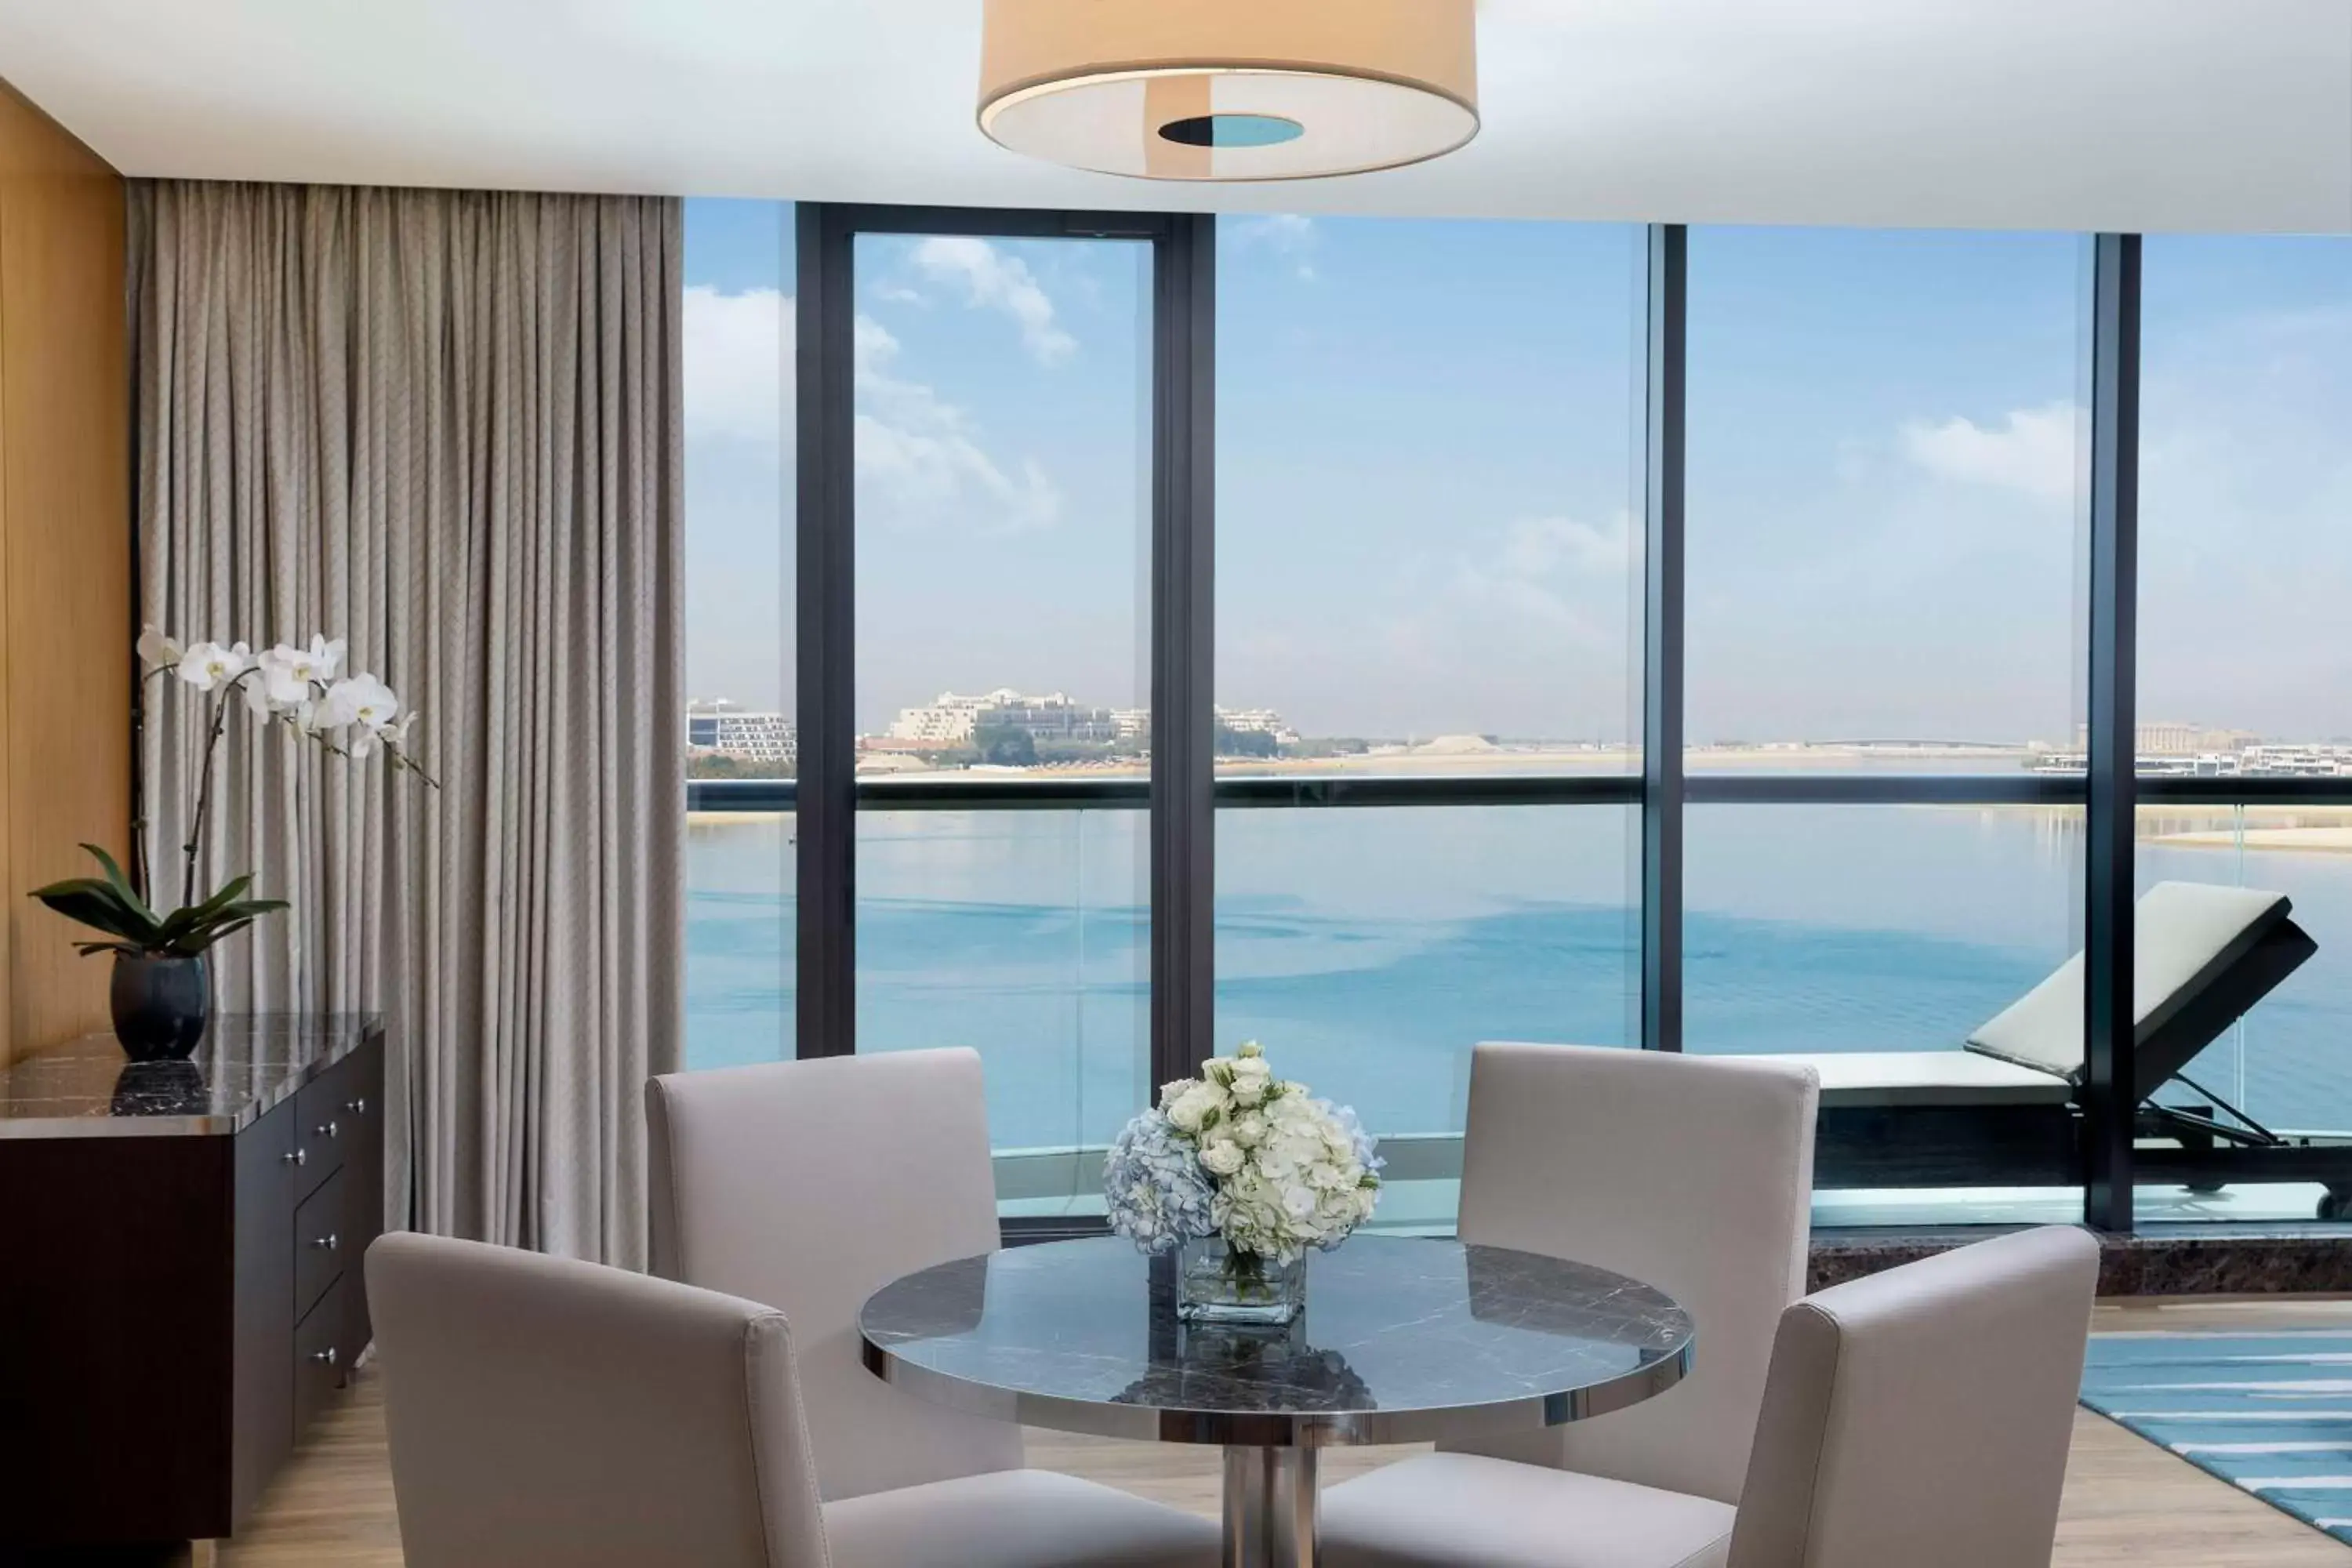 View (from property/room) in Hilton Dubai Palm Jumeirah